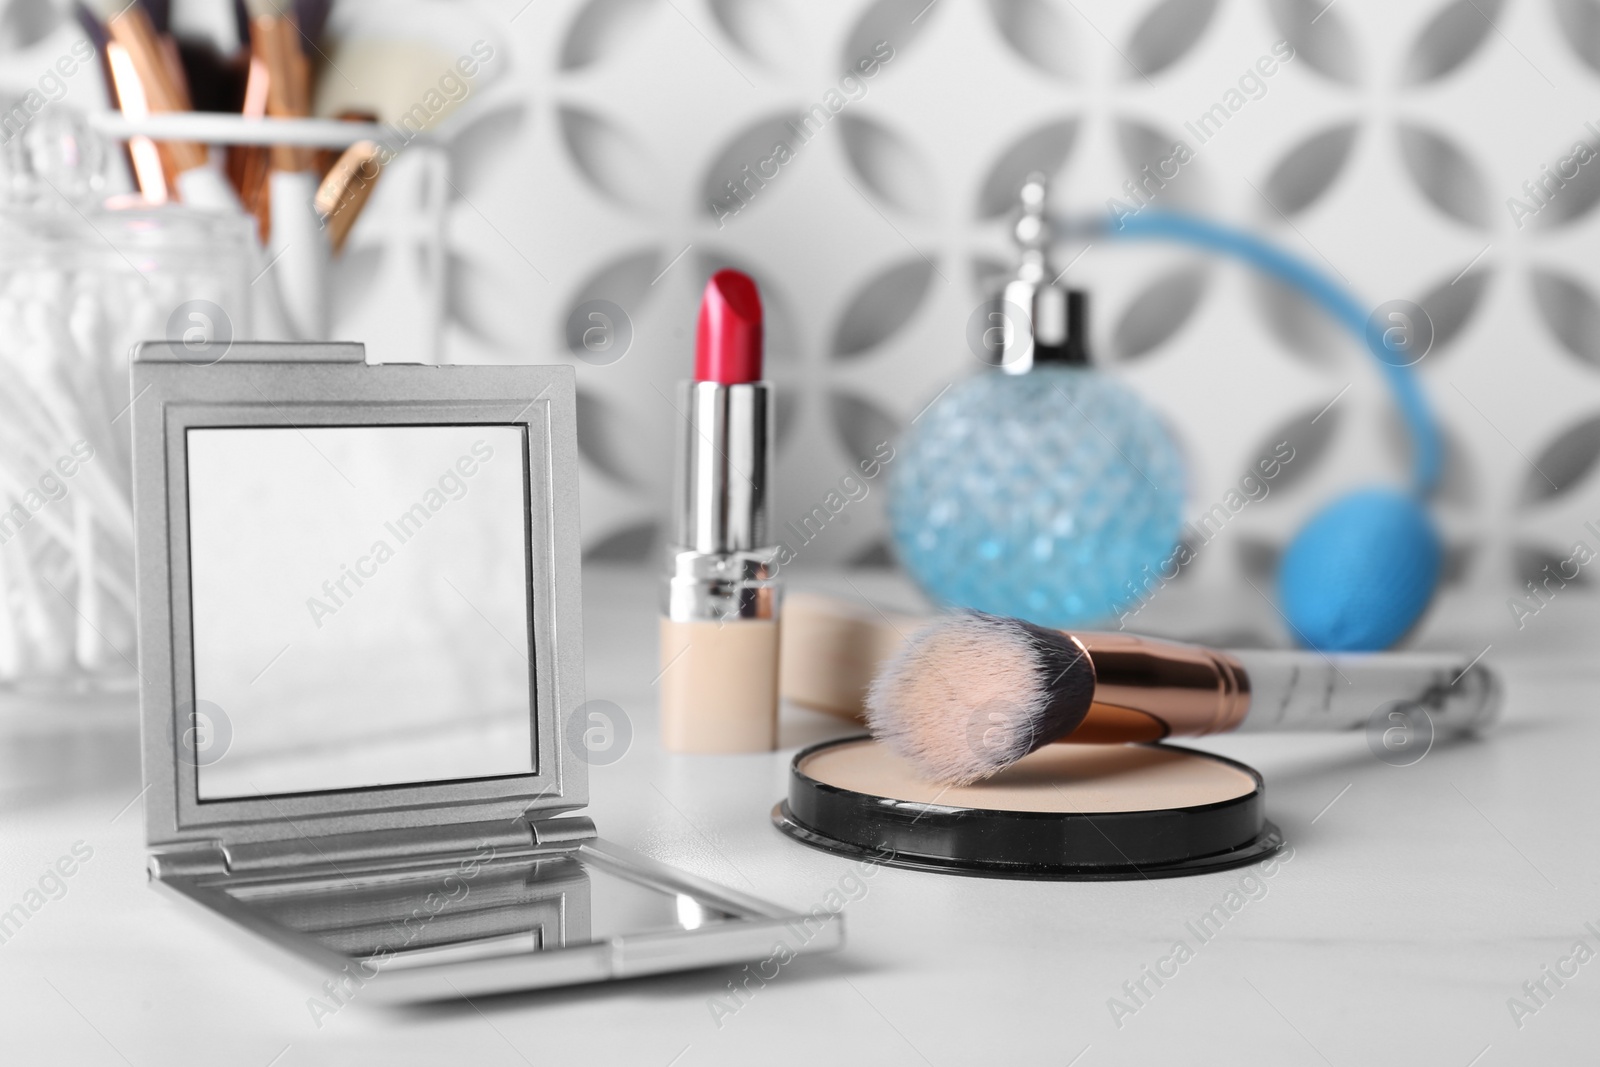 Photo of Stylish pocket mirror and cosmetic products on white table